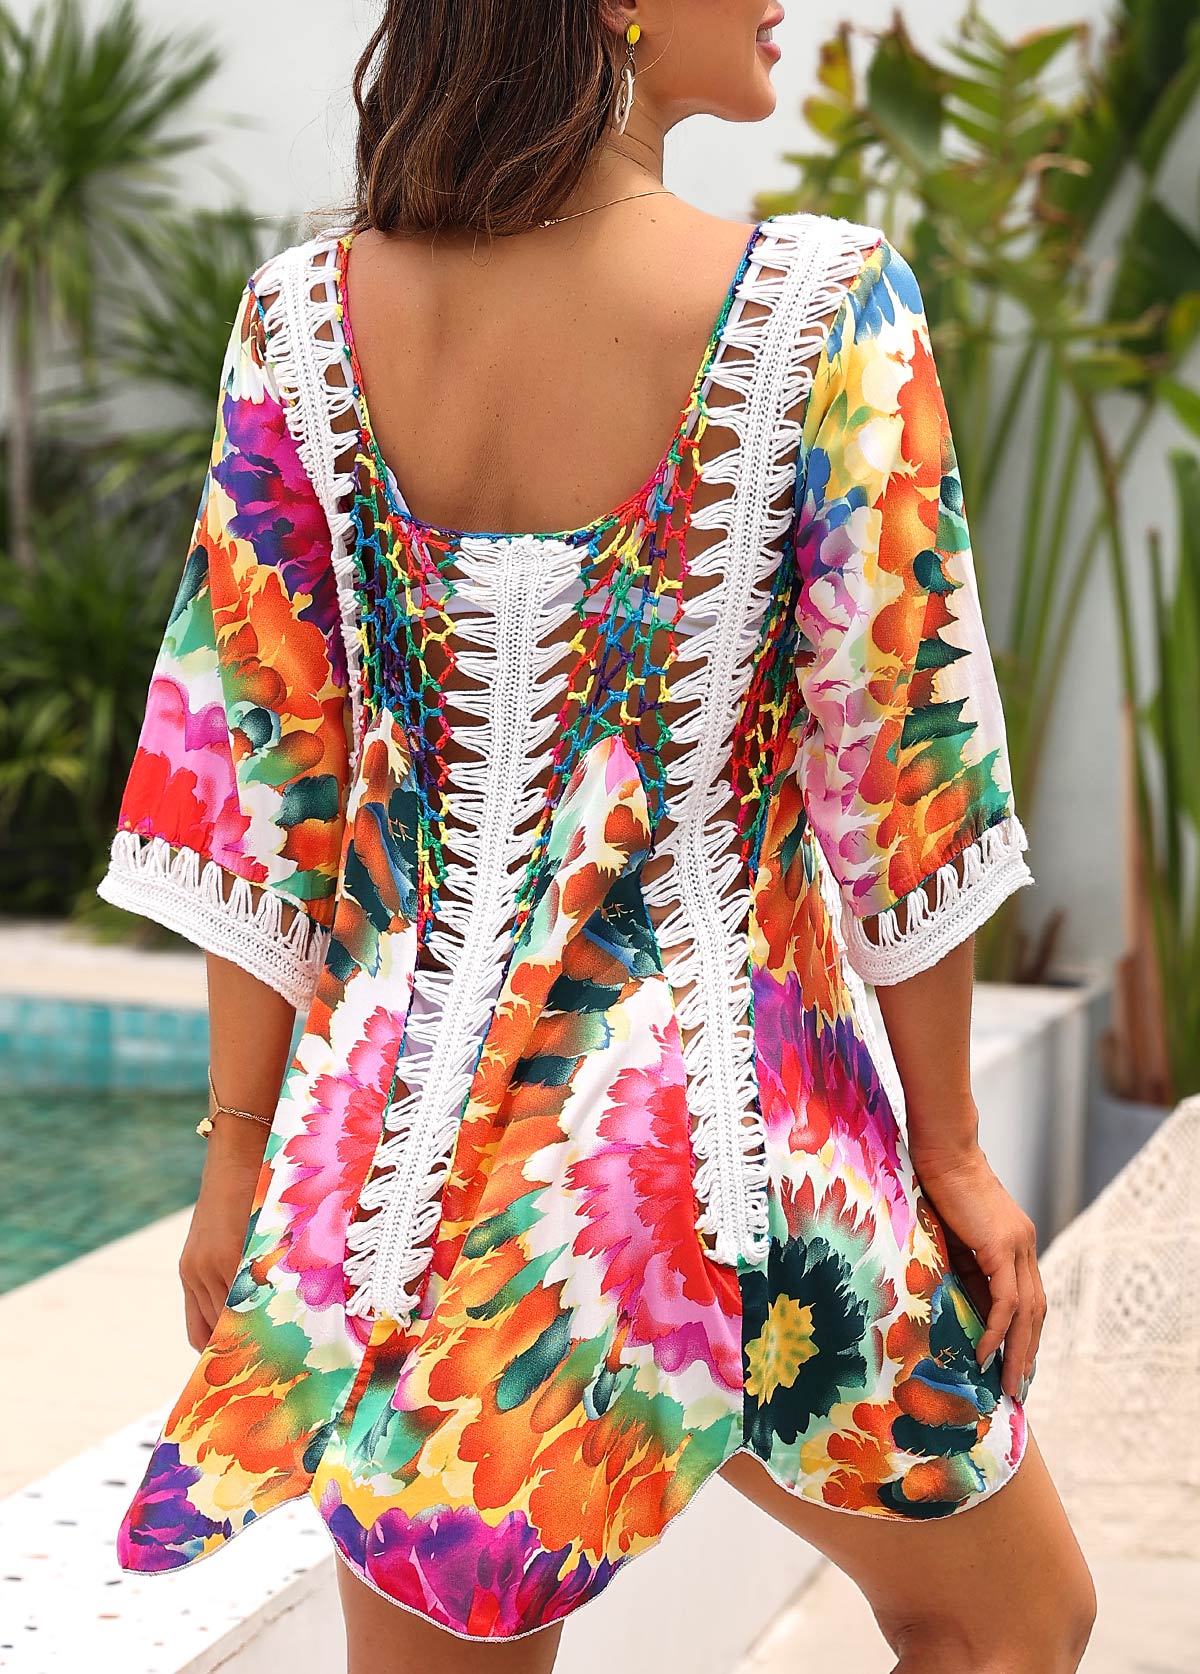 Patchwork Tie Dye Print Multi Color Cover Up